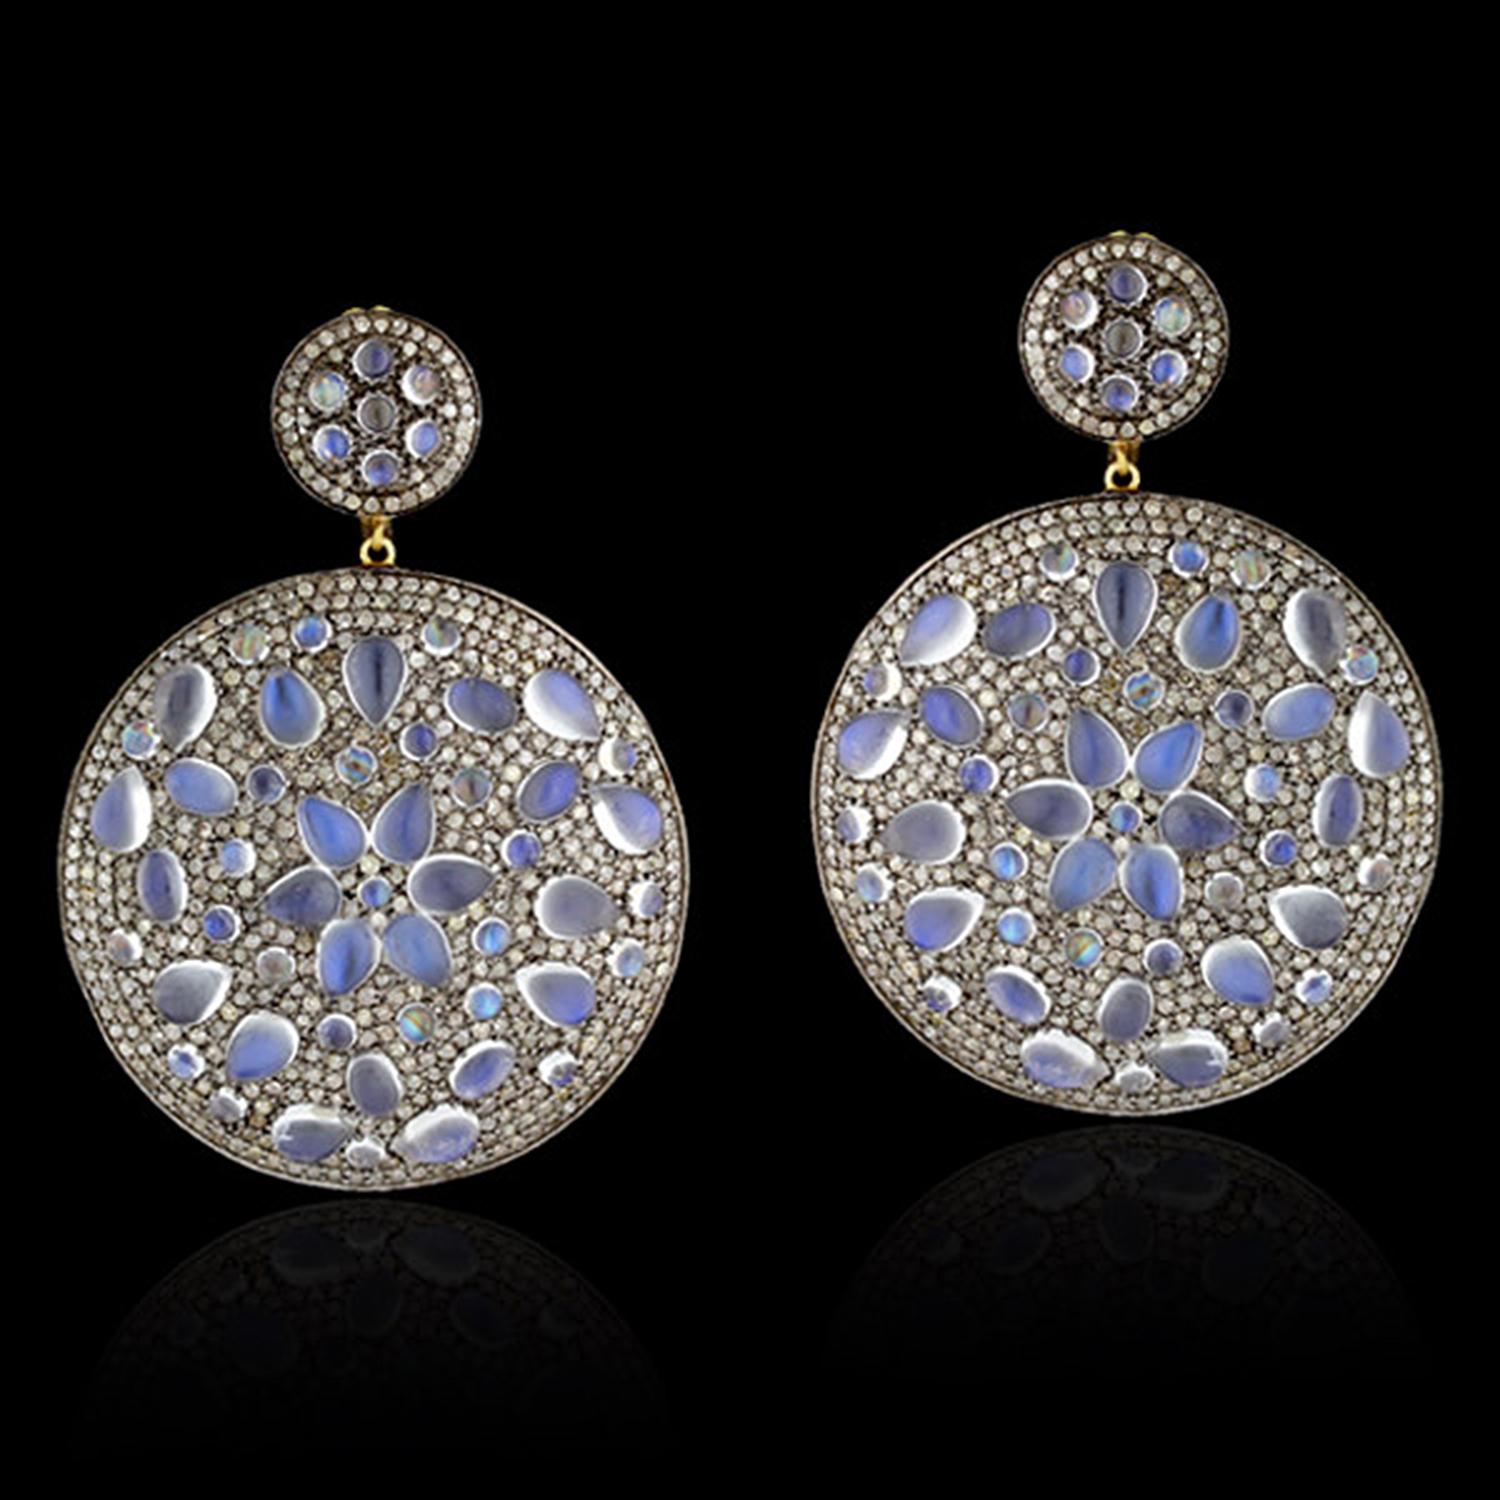 Mixed Cut Pave Diamond Earrings Equipped with Moonstones Made in 14k Yellow Gold For Sale